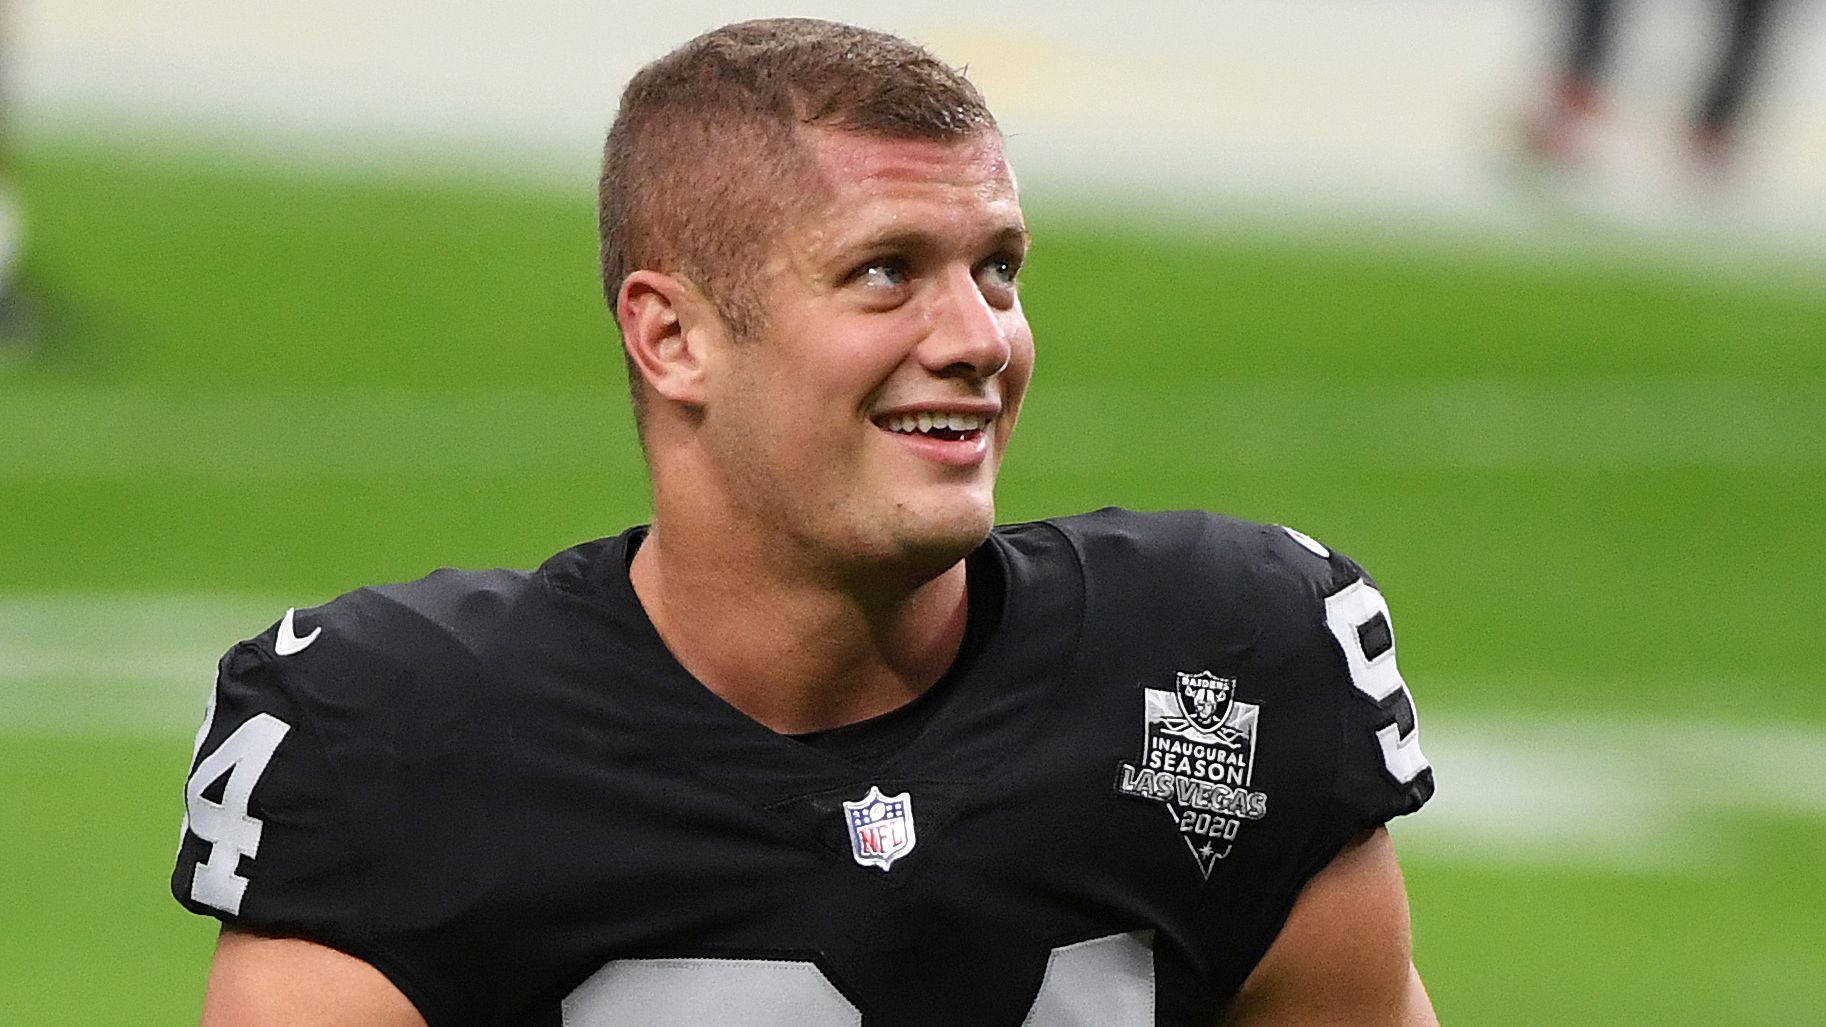 Carl Nassib's NFL jersey is top seller after he announces he's gay